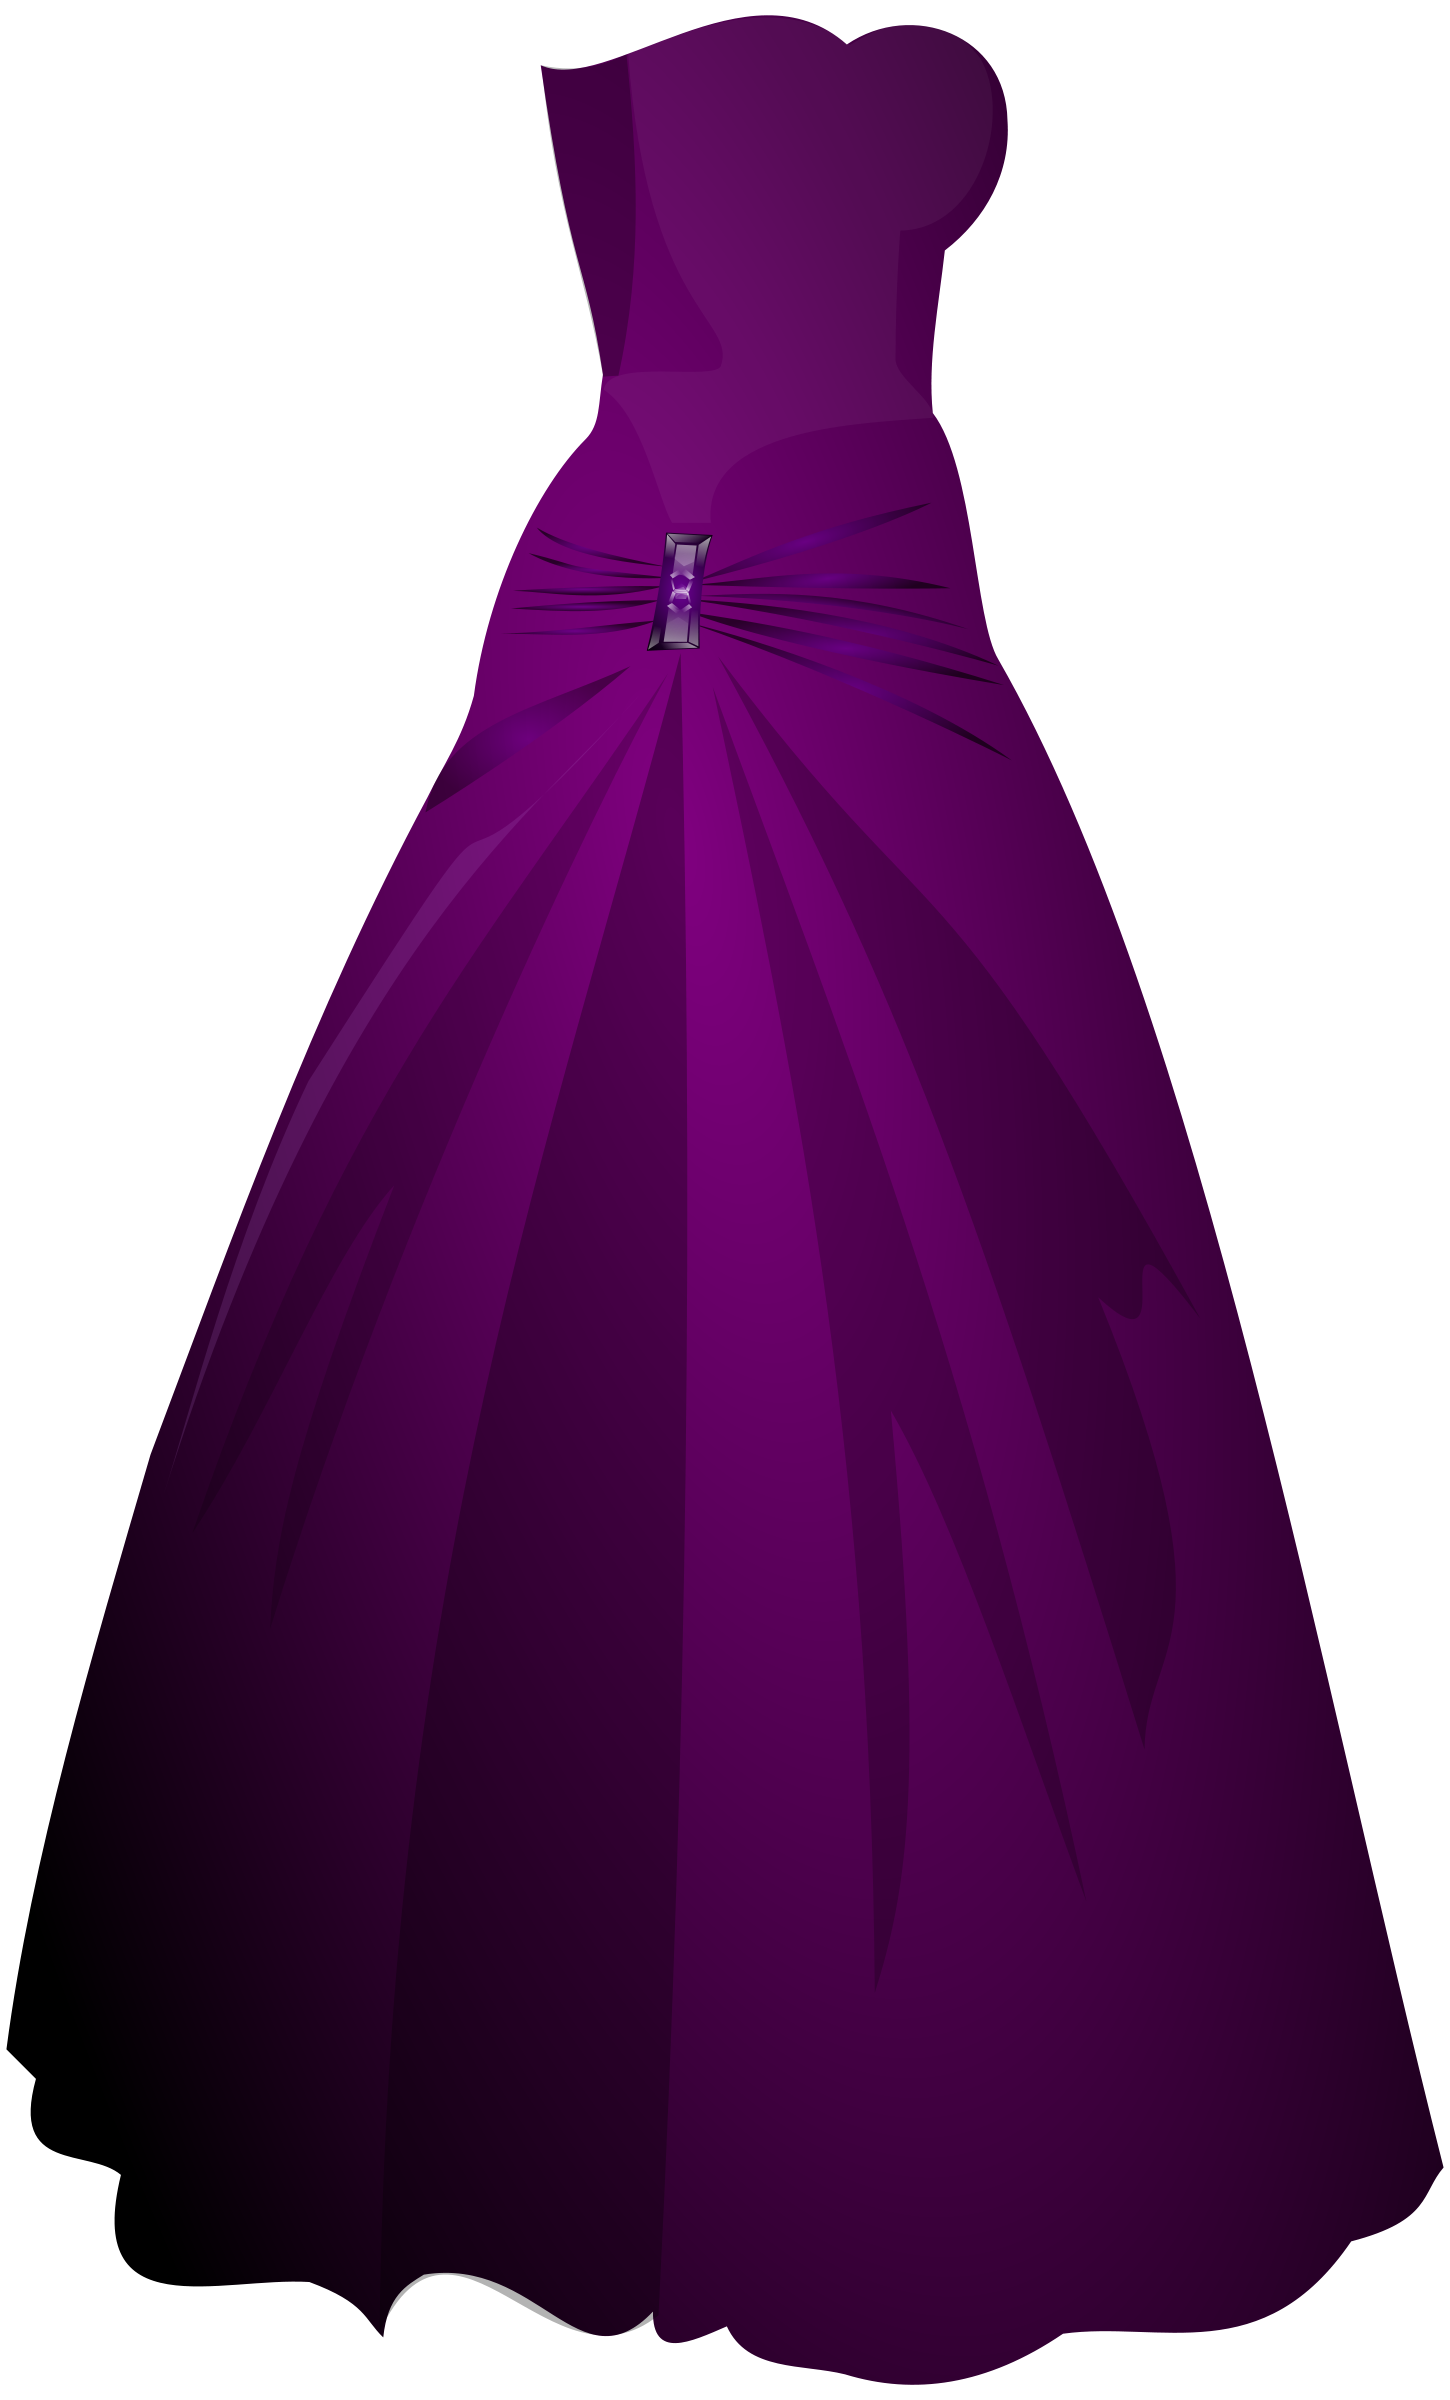 clipart picture of a dress - photo #14